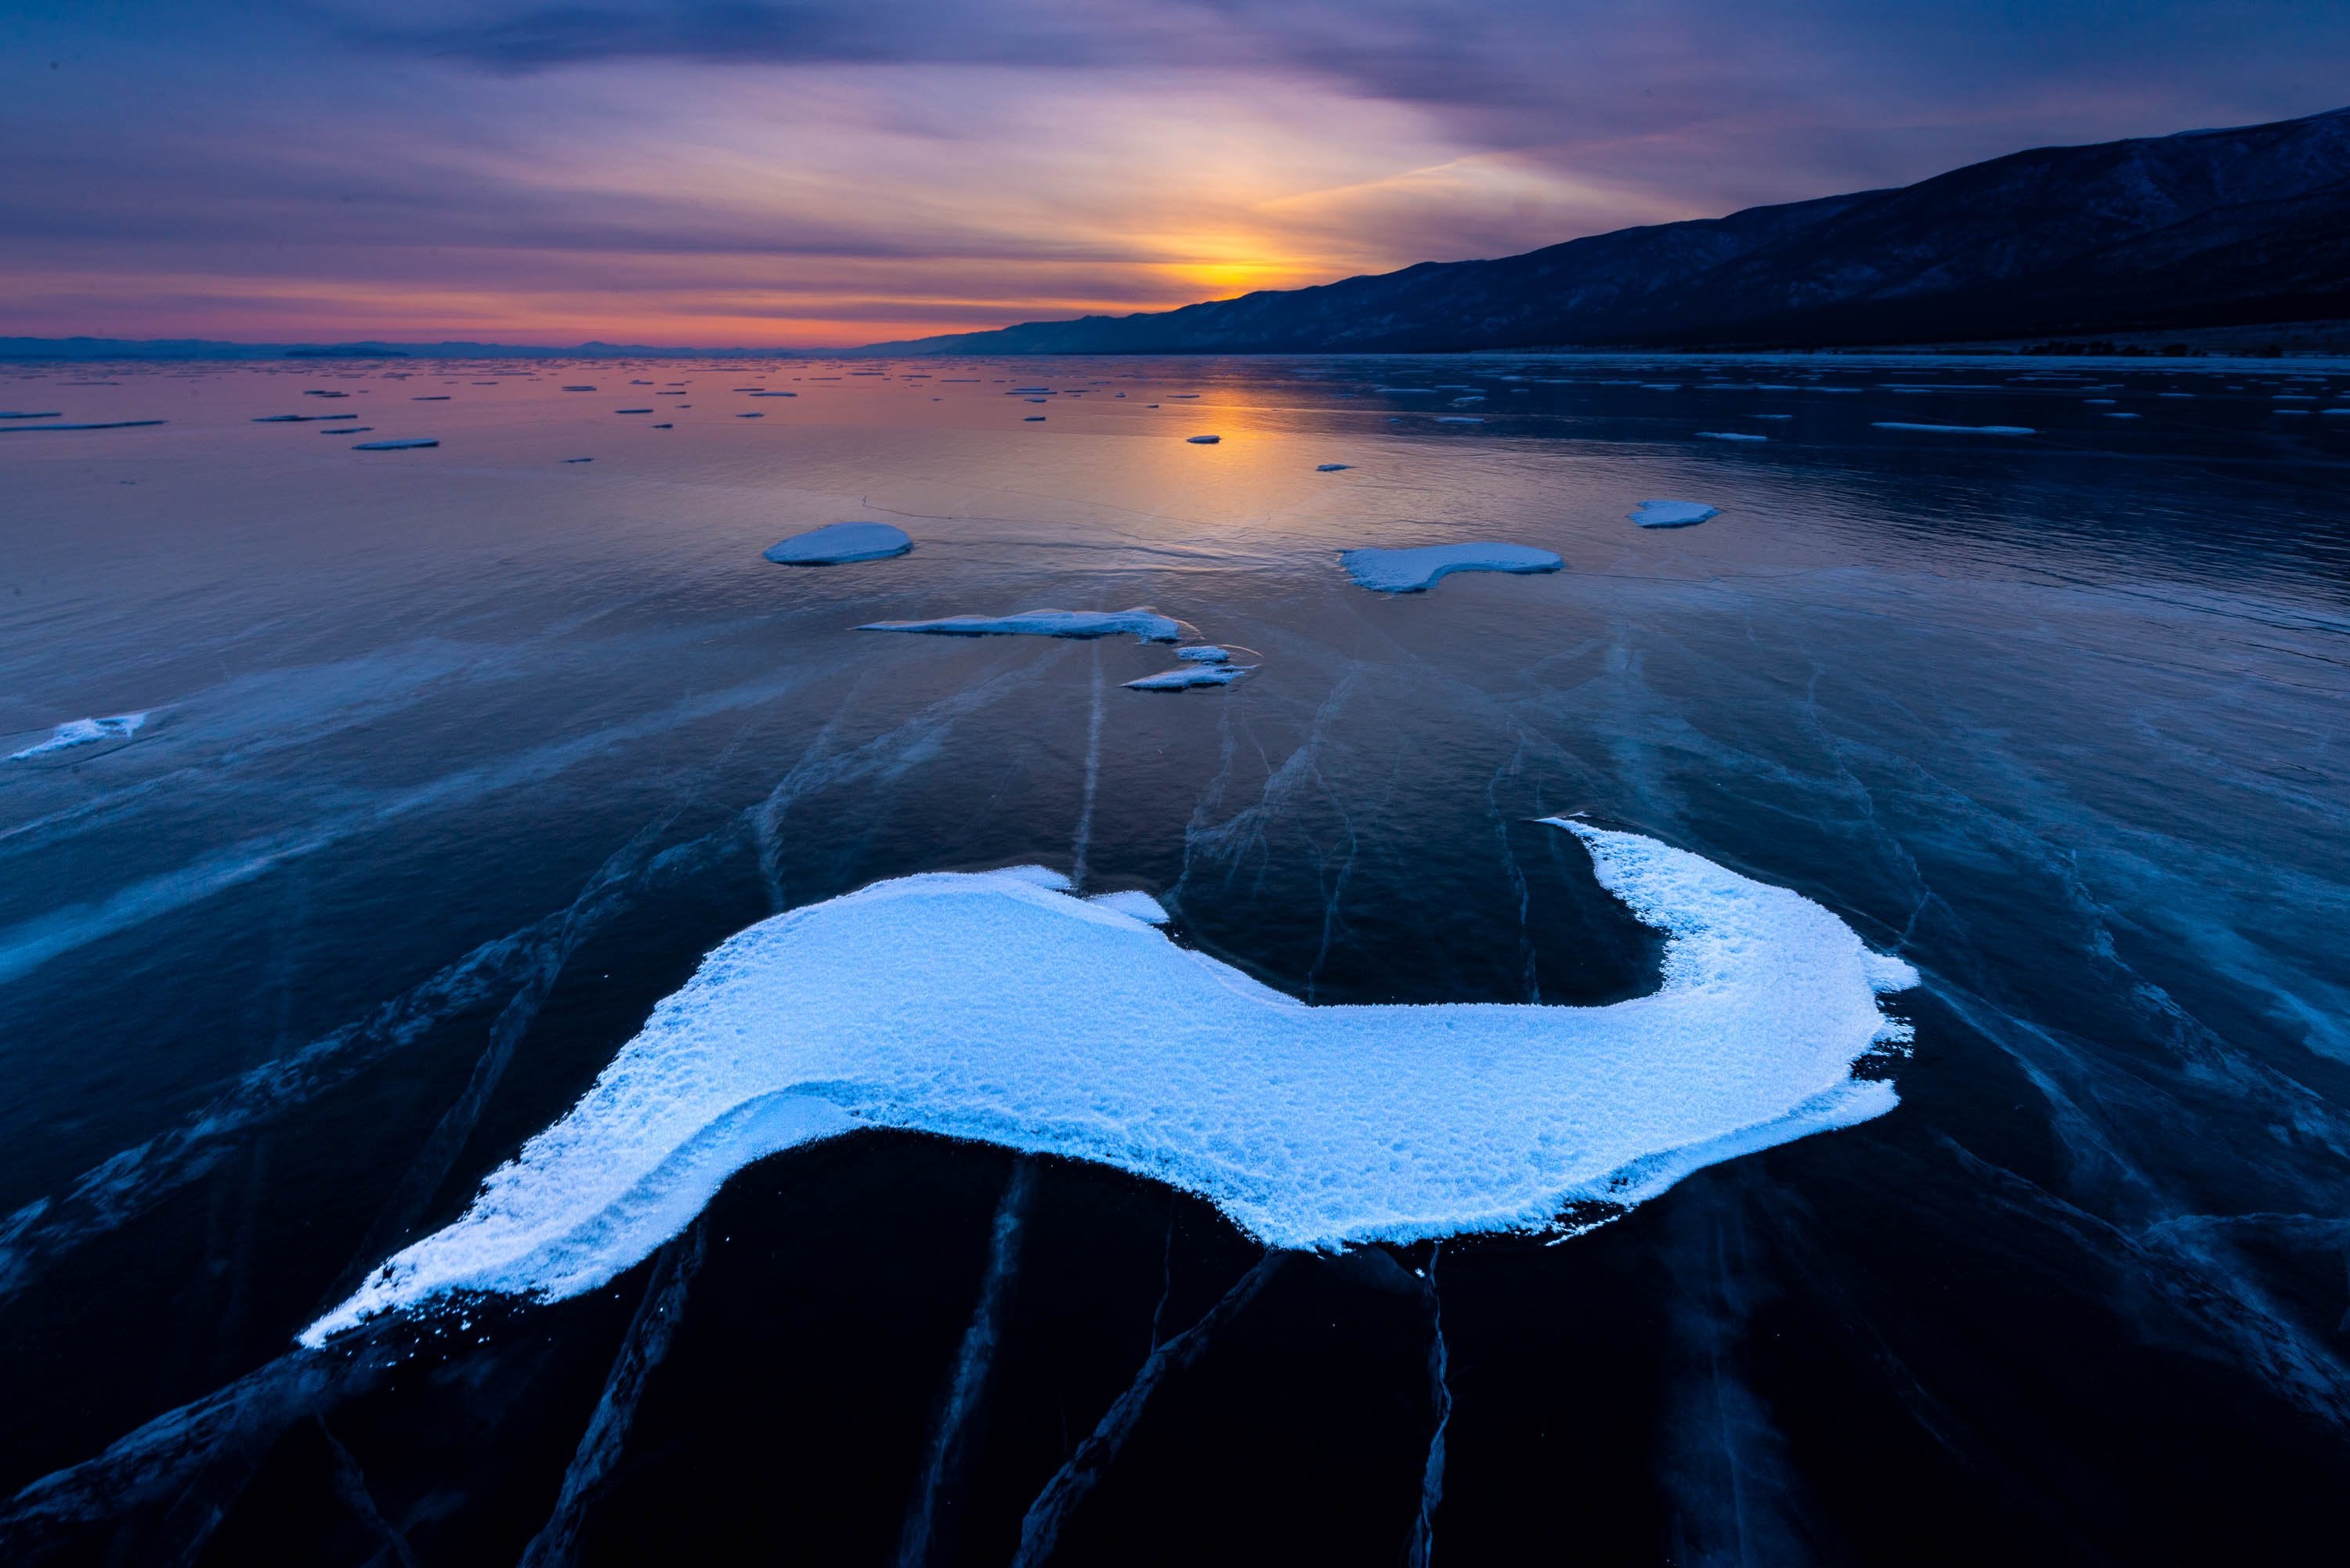 A frozen lake with some fresh snow, and a sunset effect in the background, Lake Baikal #32, Siberia, Russia